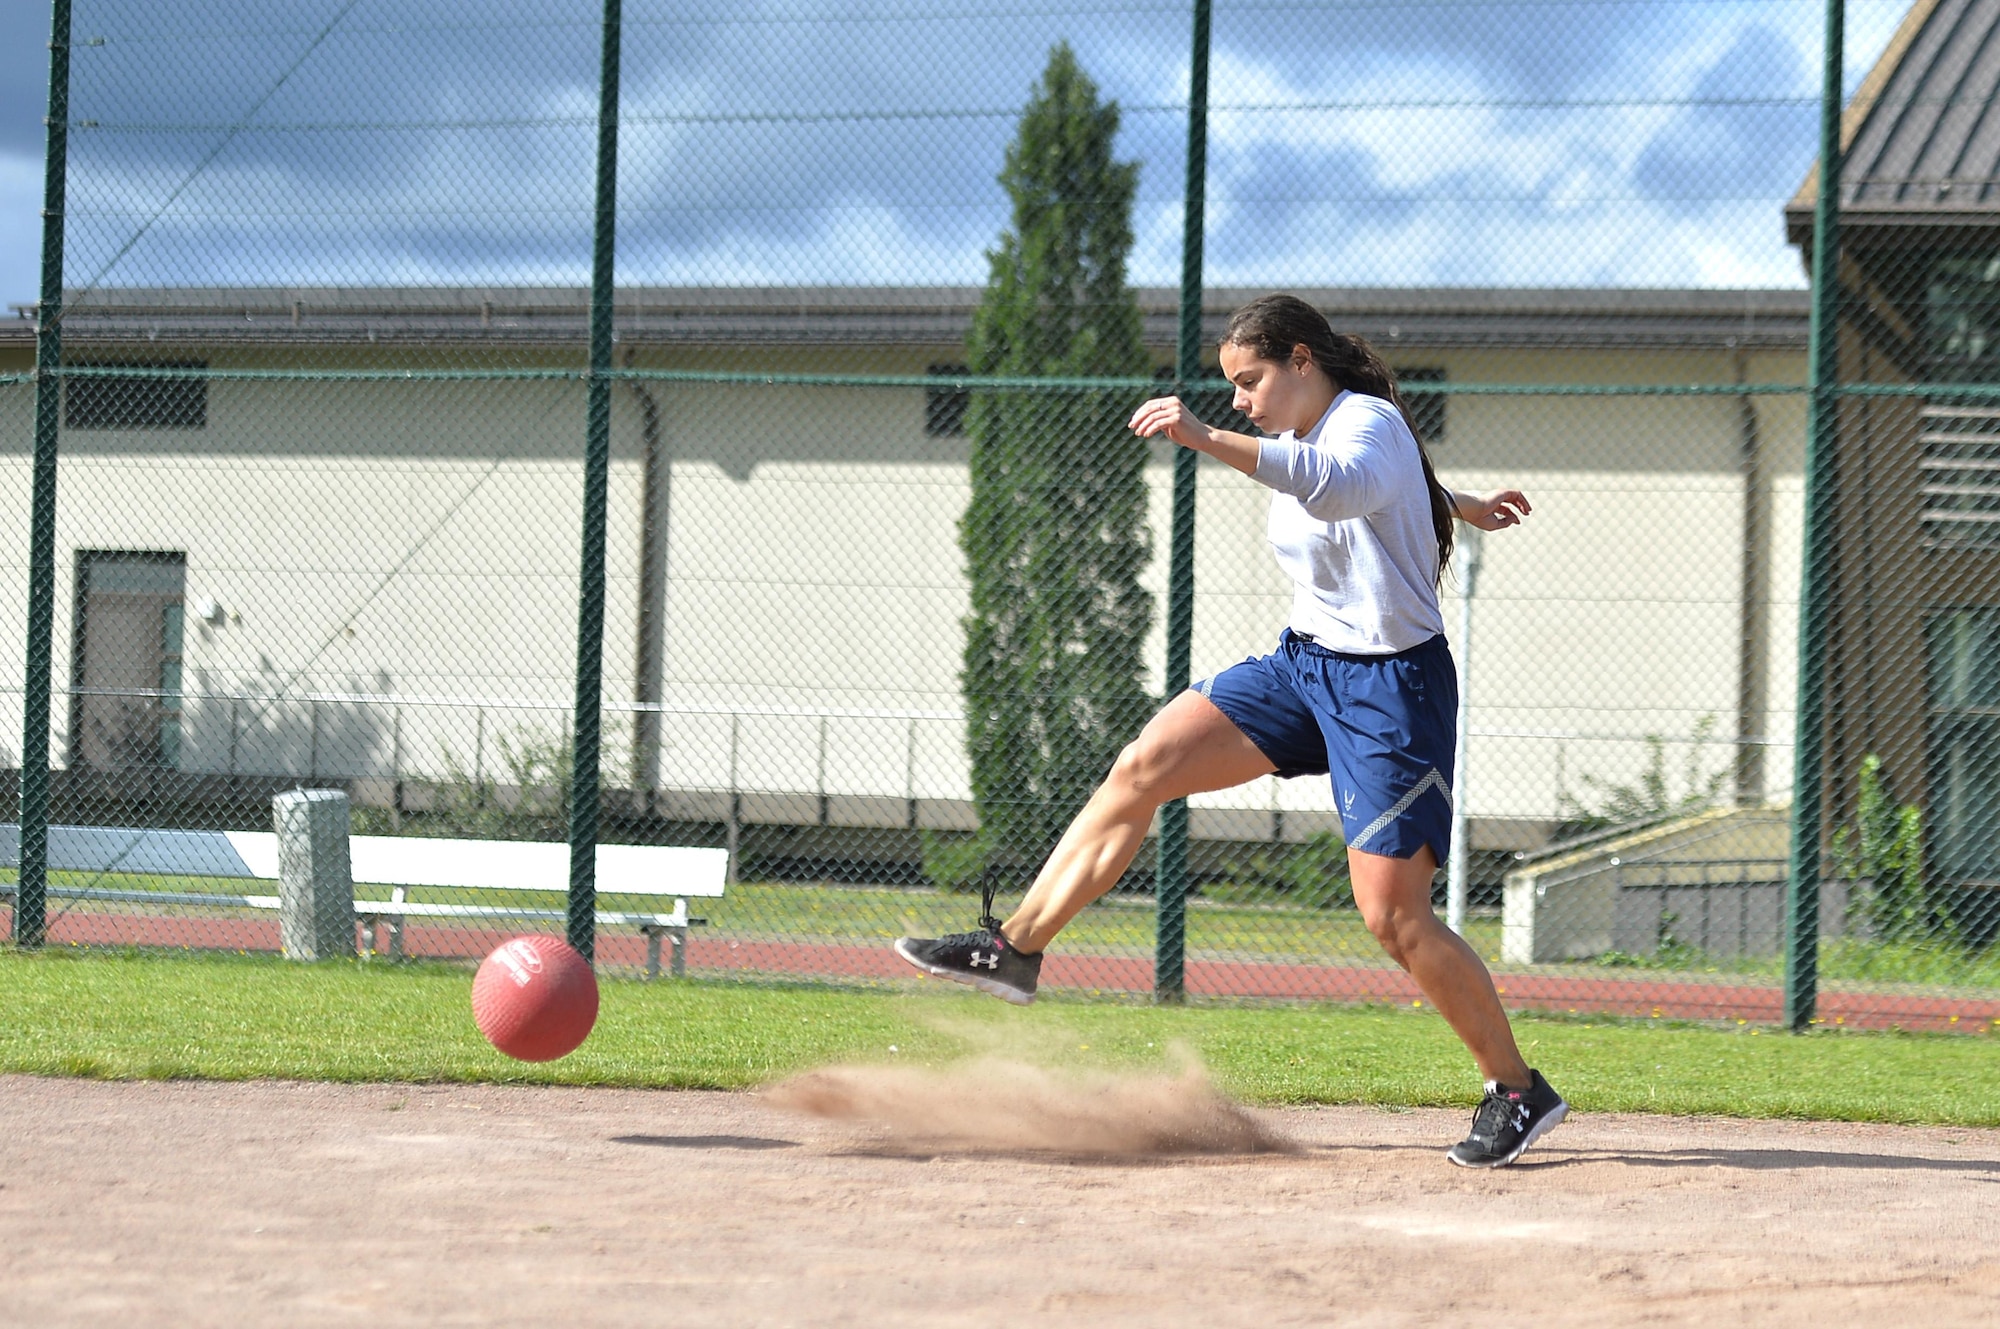 A U.S. Airman assigned to the 86th Airlift Wing plays kickball on Ramstein Air Base, Germany, Sept. 6, 2017. Airmen from all over the wing competed in the annual Commander’s Challenge resiliency day. (U.S. Air Force photo by Airman 1st Class Joshua Magbanua)